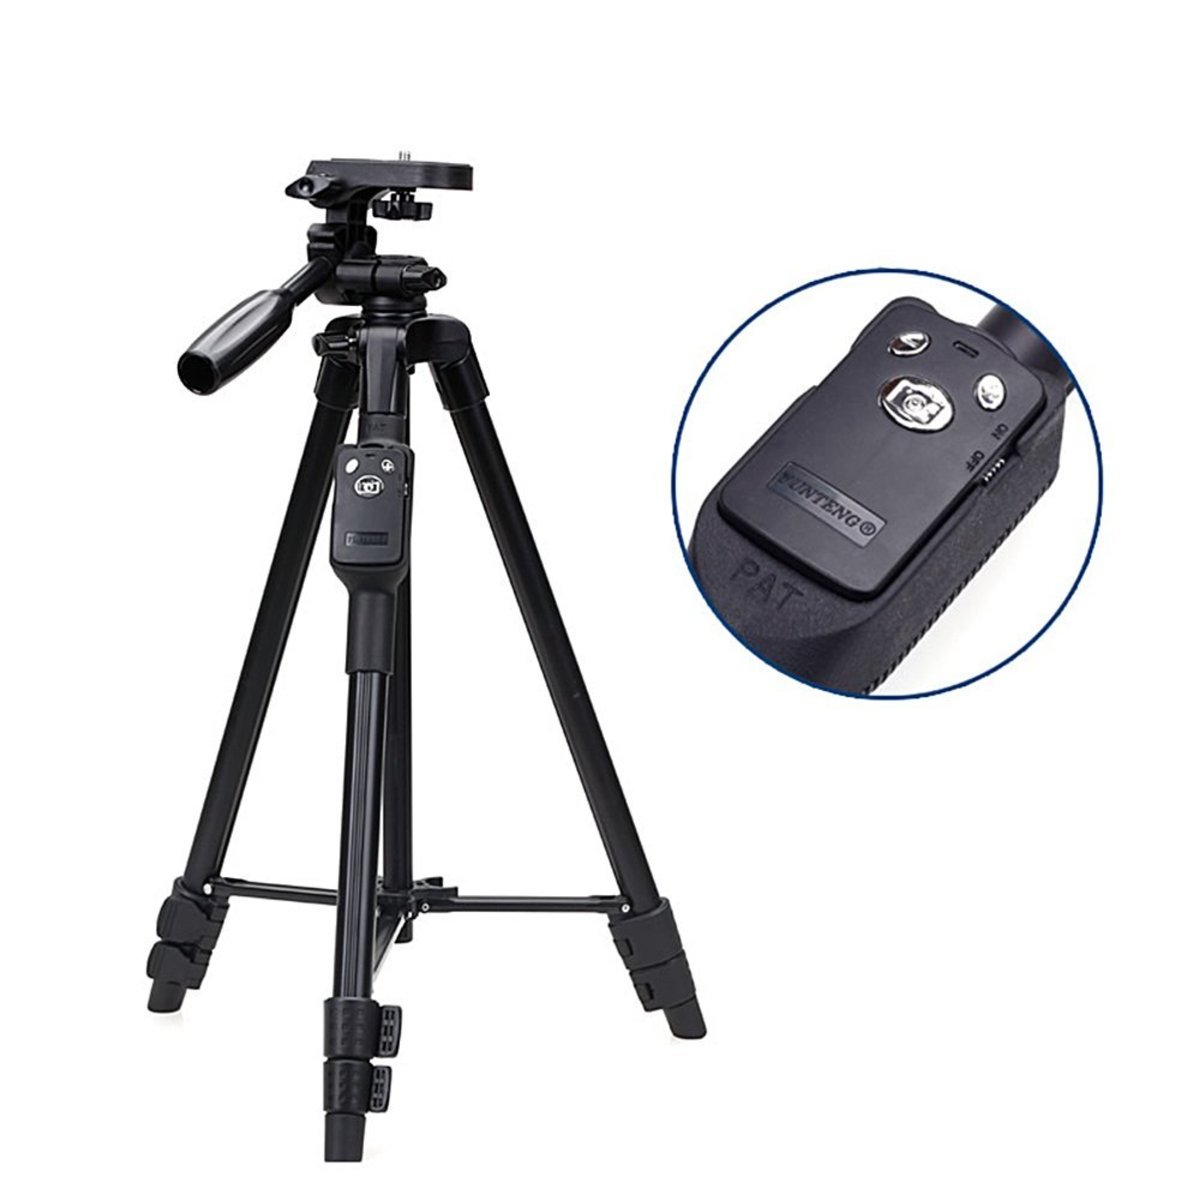 VCT-5208 Aluminum Tripod with 3-Way Head & bluetooth Remote and Clip for Camera Phone